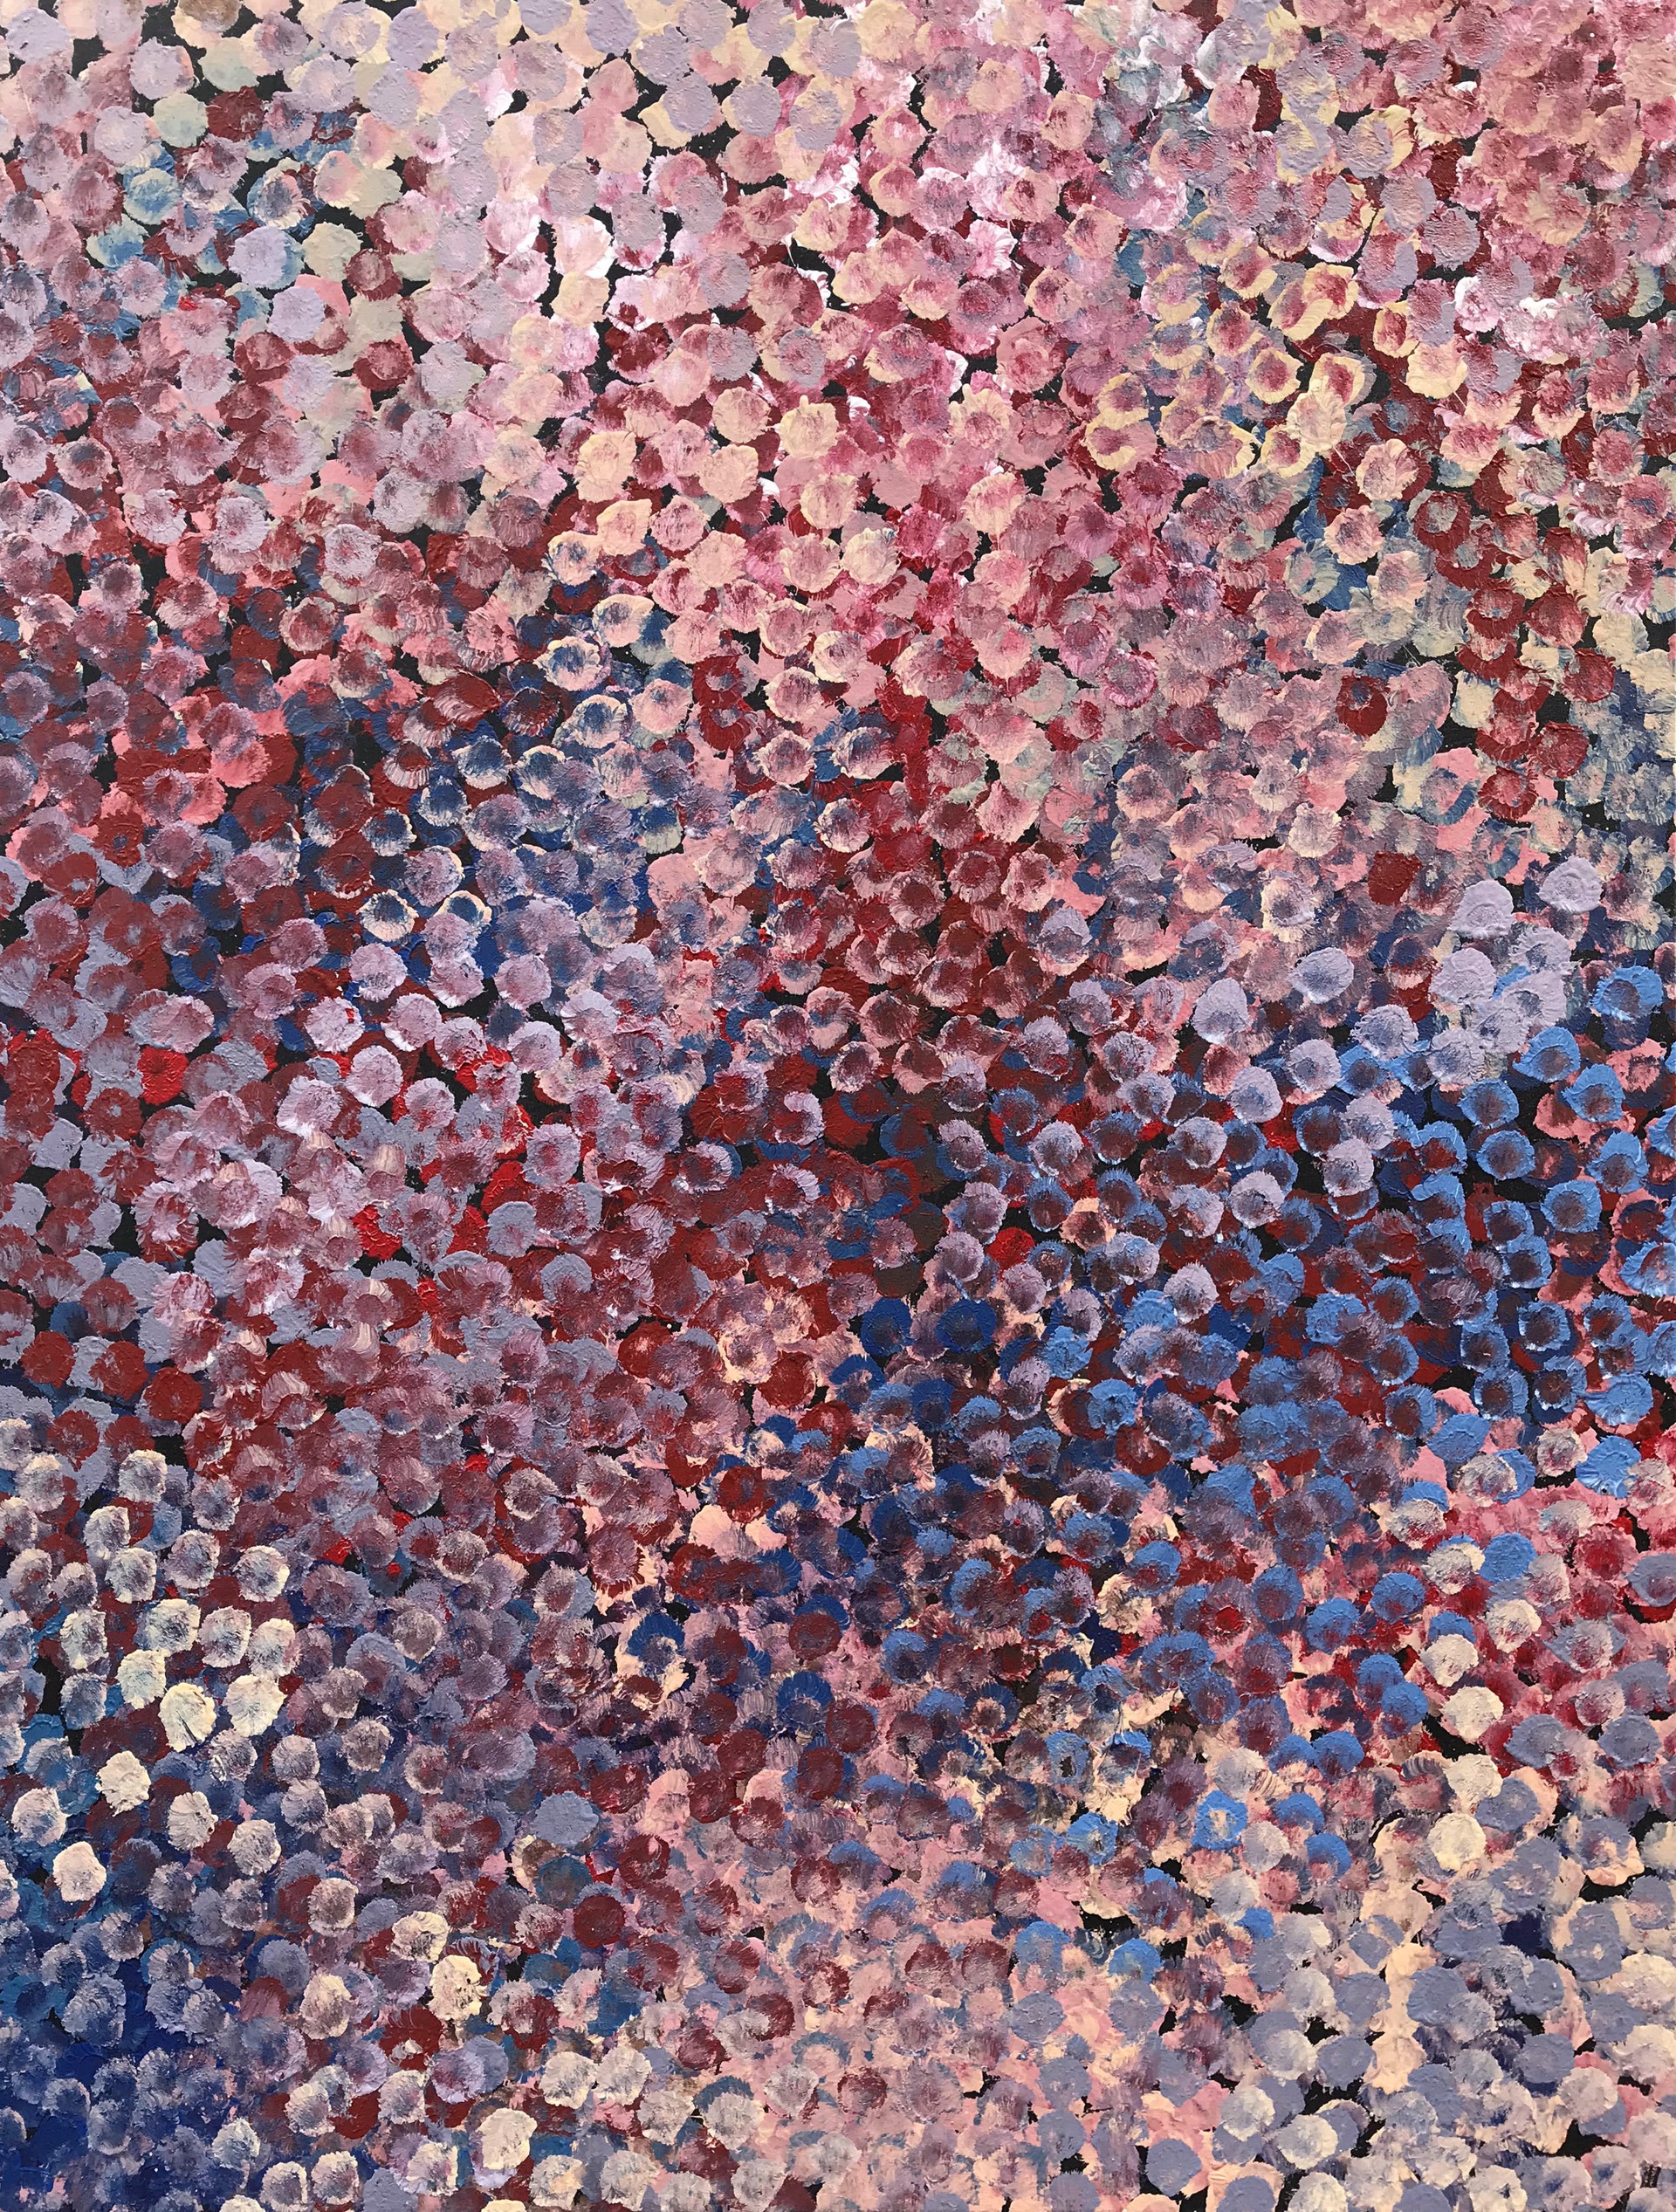 My Country Dreaming by Emily Kame Kngwarreye